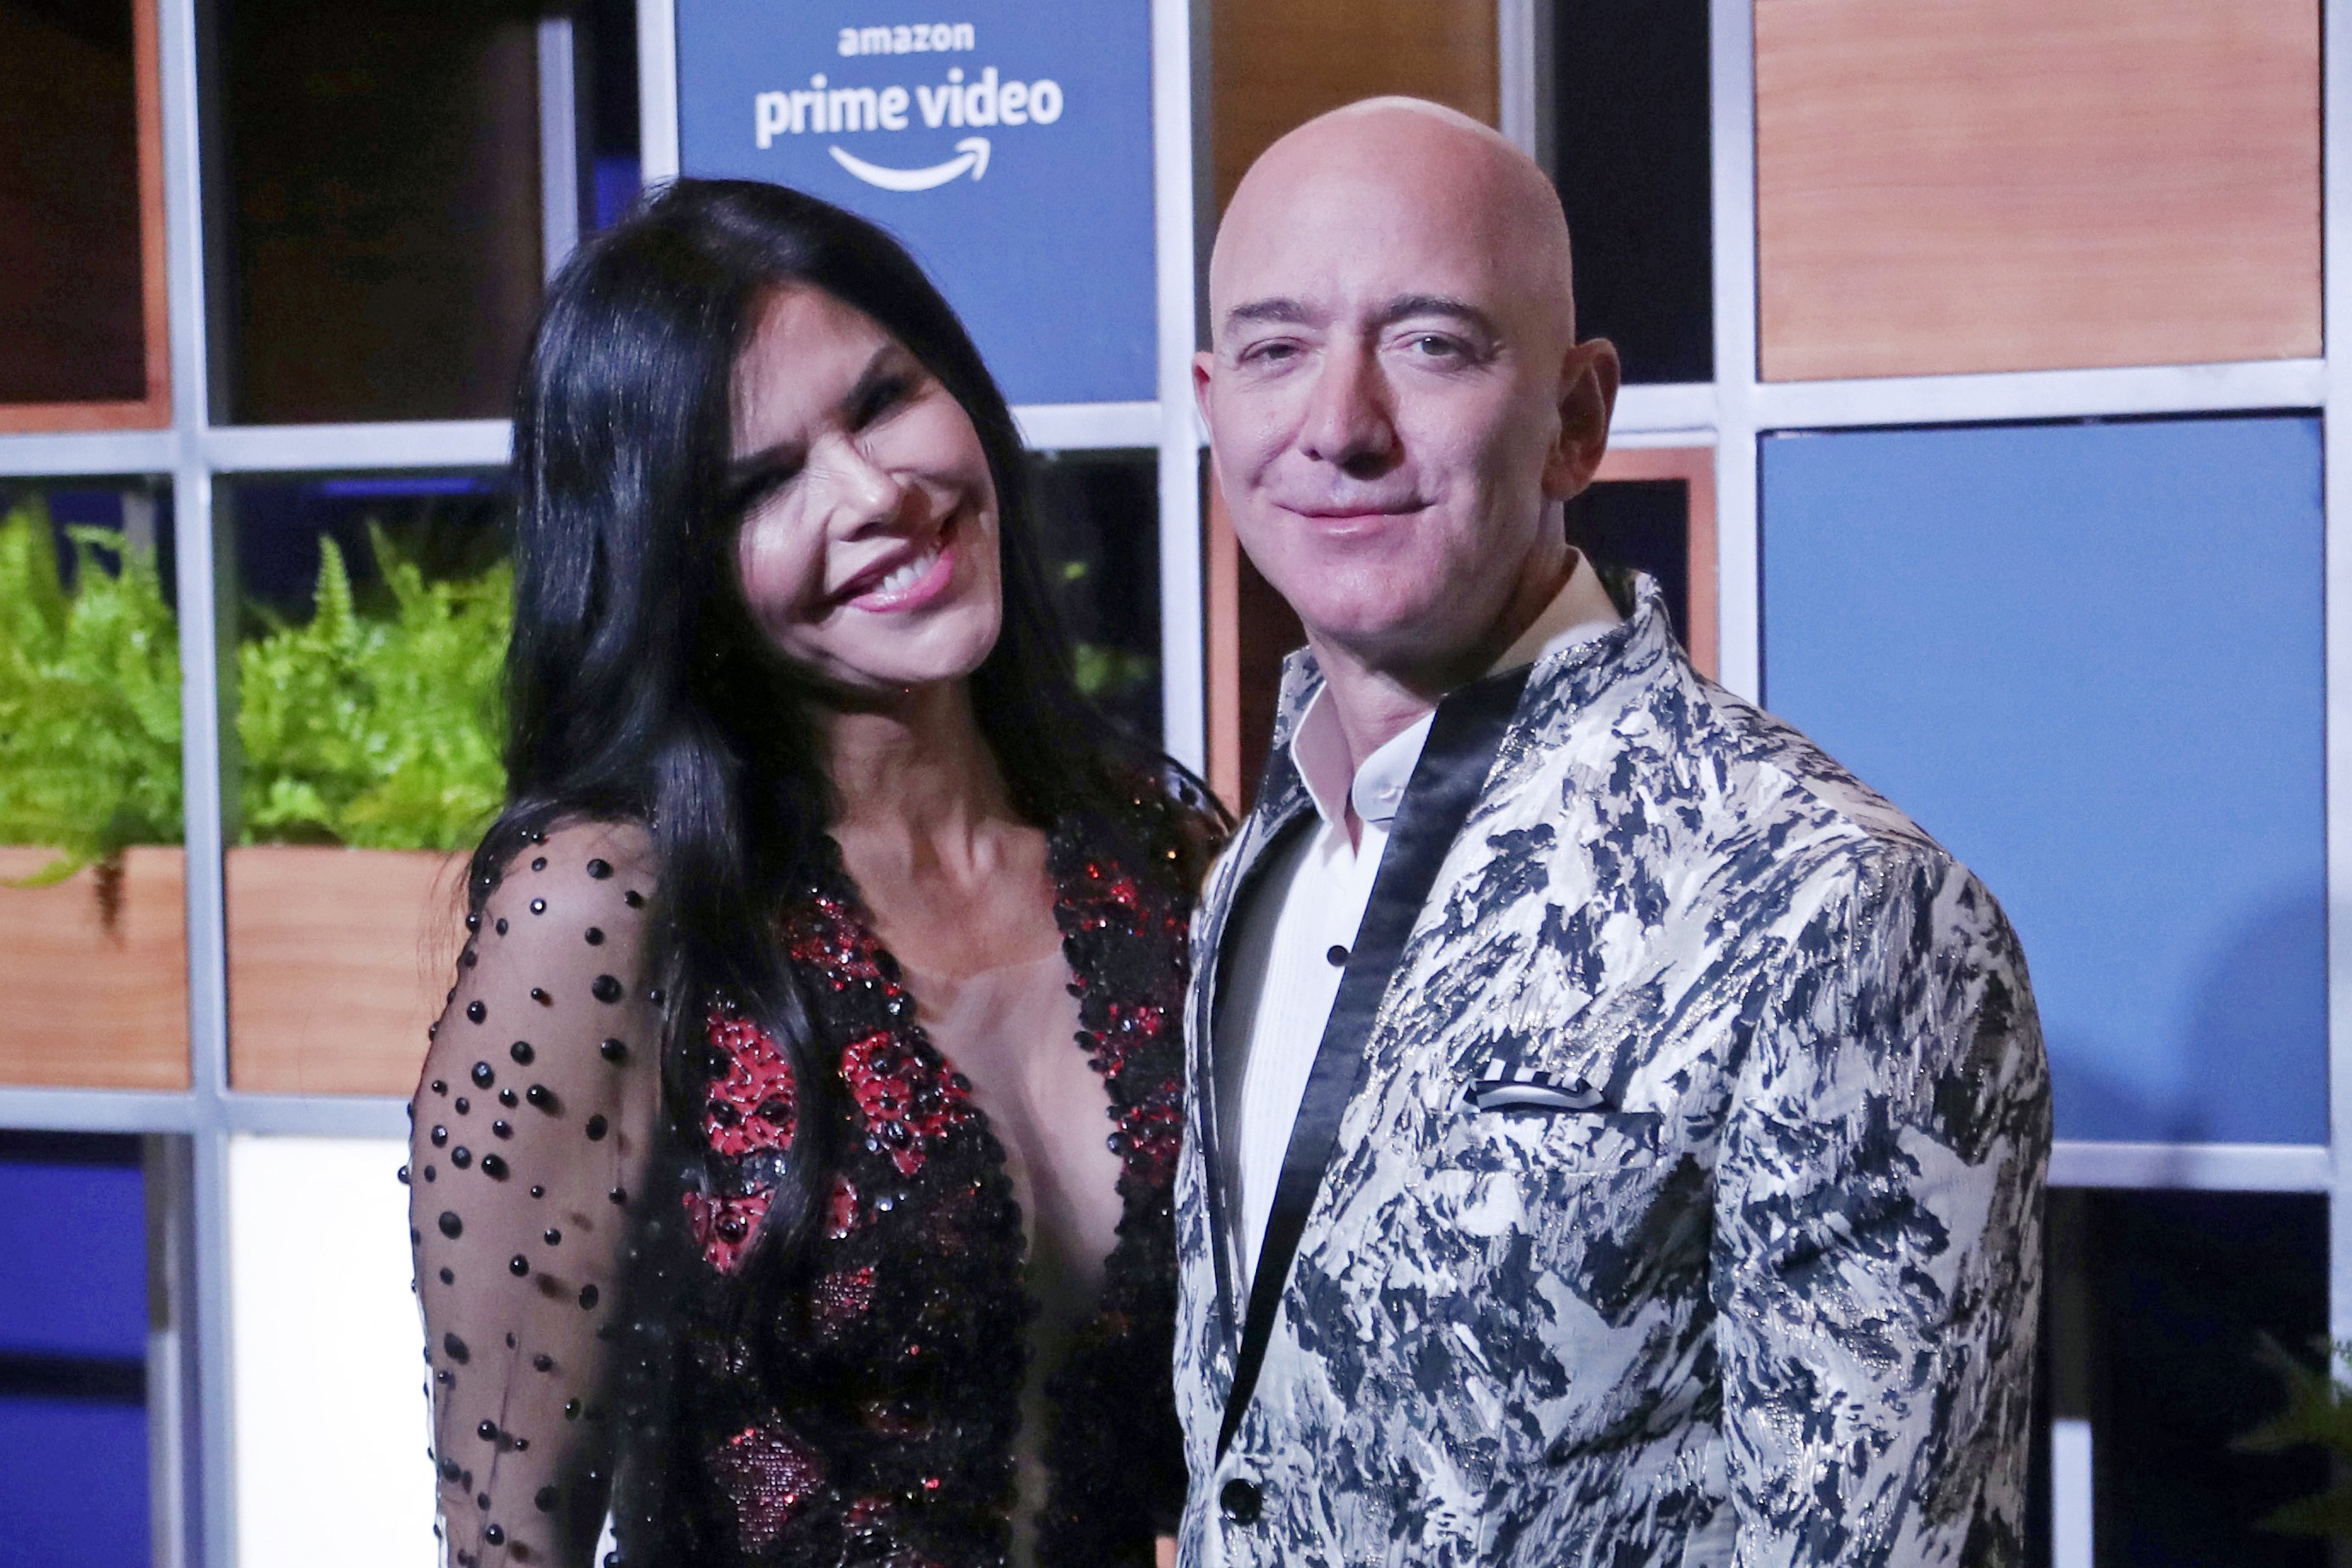 Amazon CEO Jeff Bezos, seen with his girlfriend Lauren Sanchez in Mumbai on January 16, remains the world’s richest billionaire. But his wealth has shrunk from US$135 billion to US$128 billion. Photo: AP